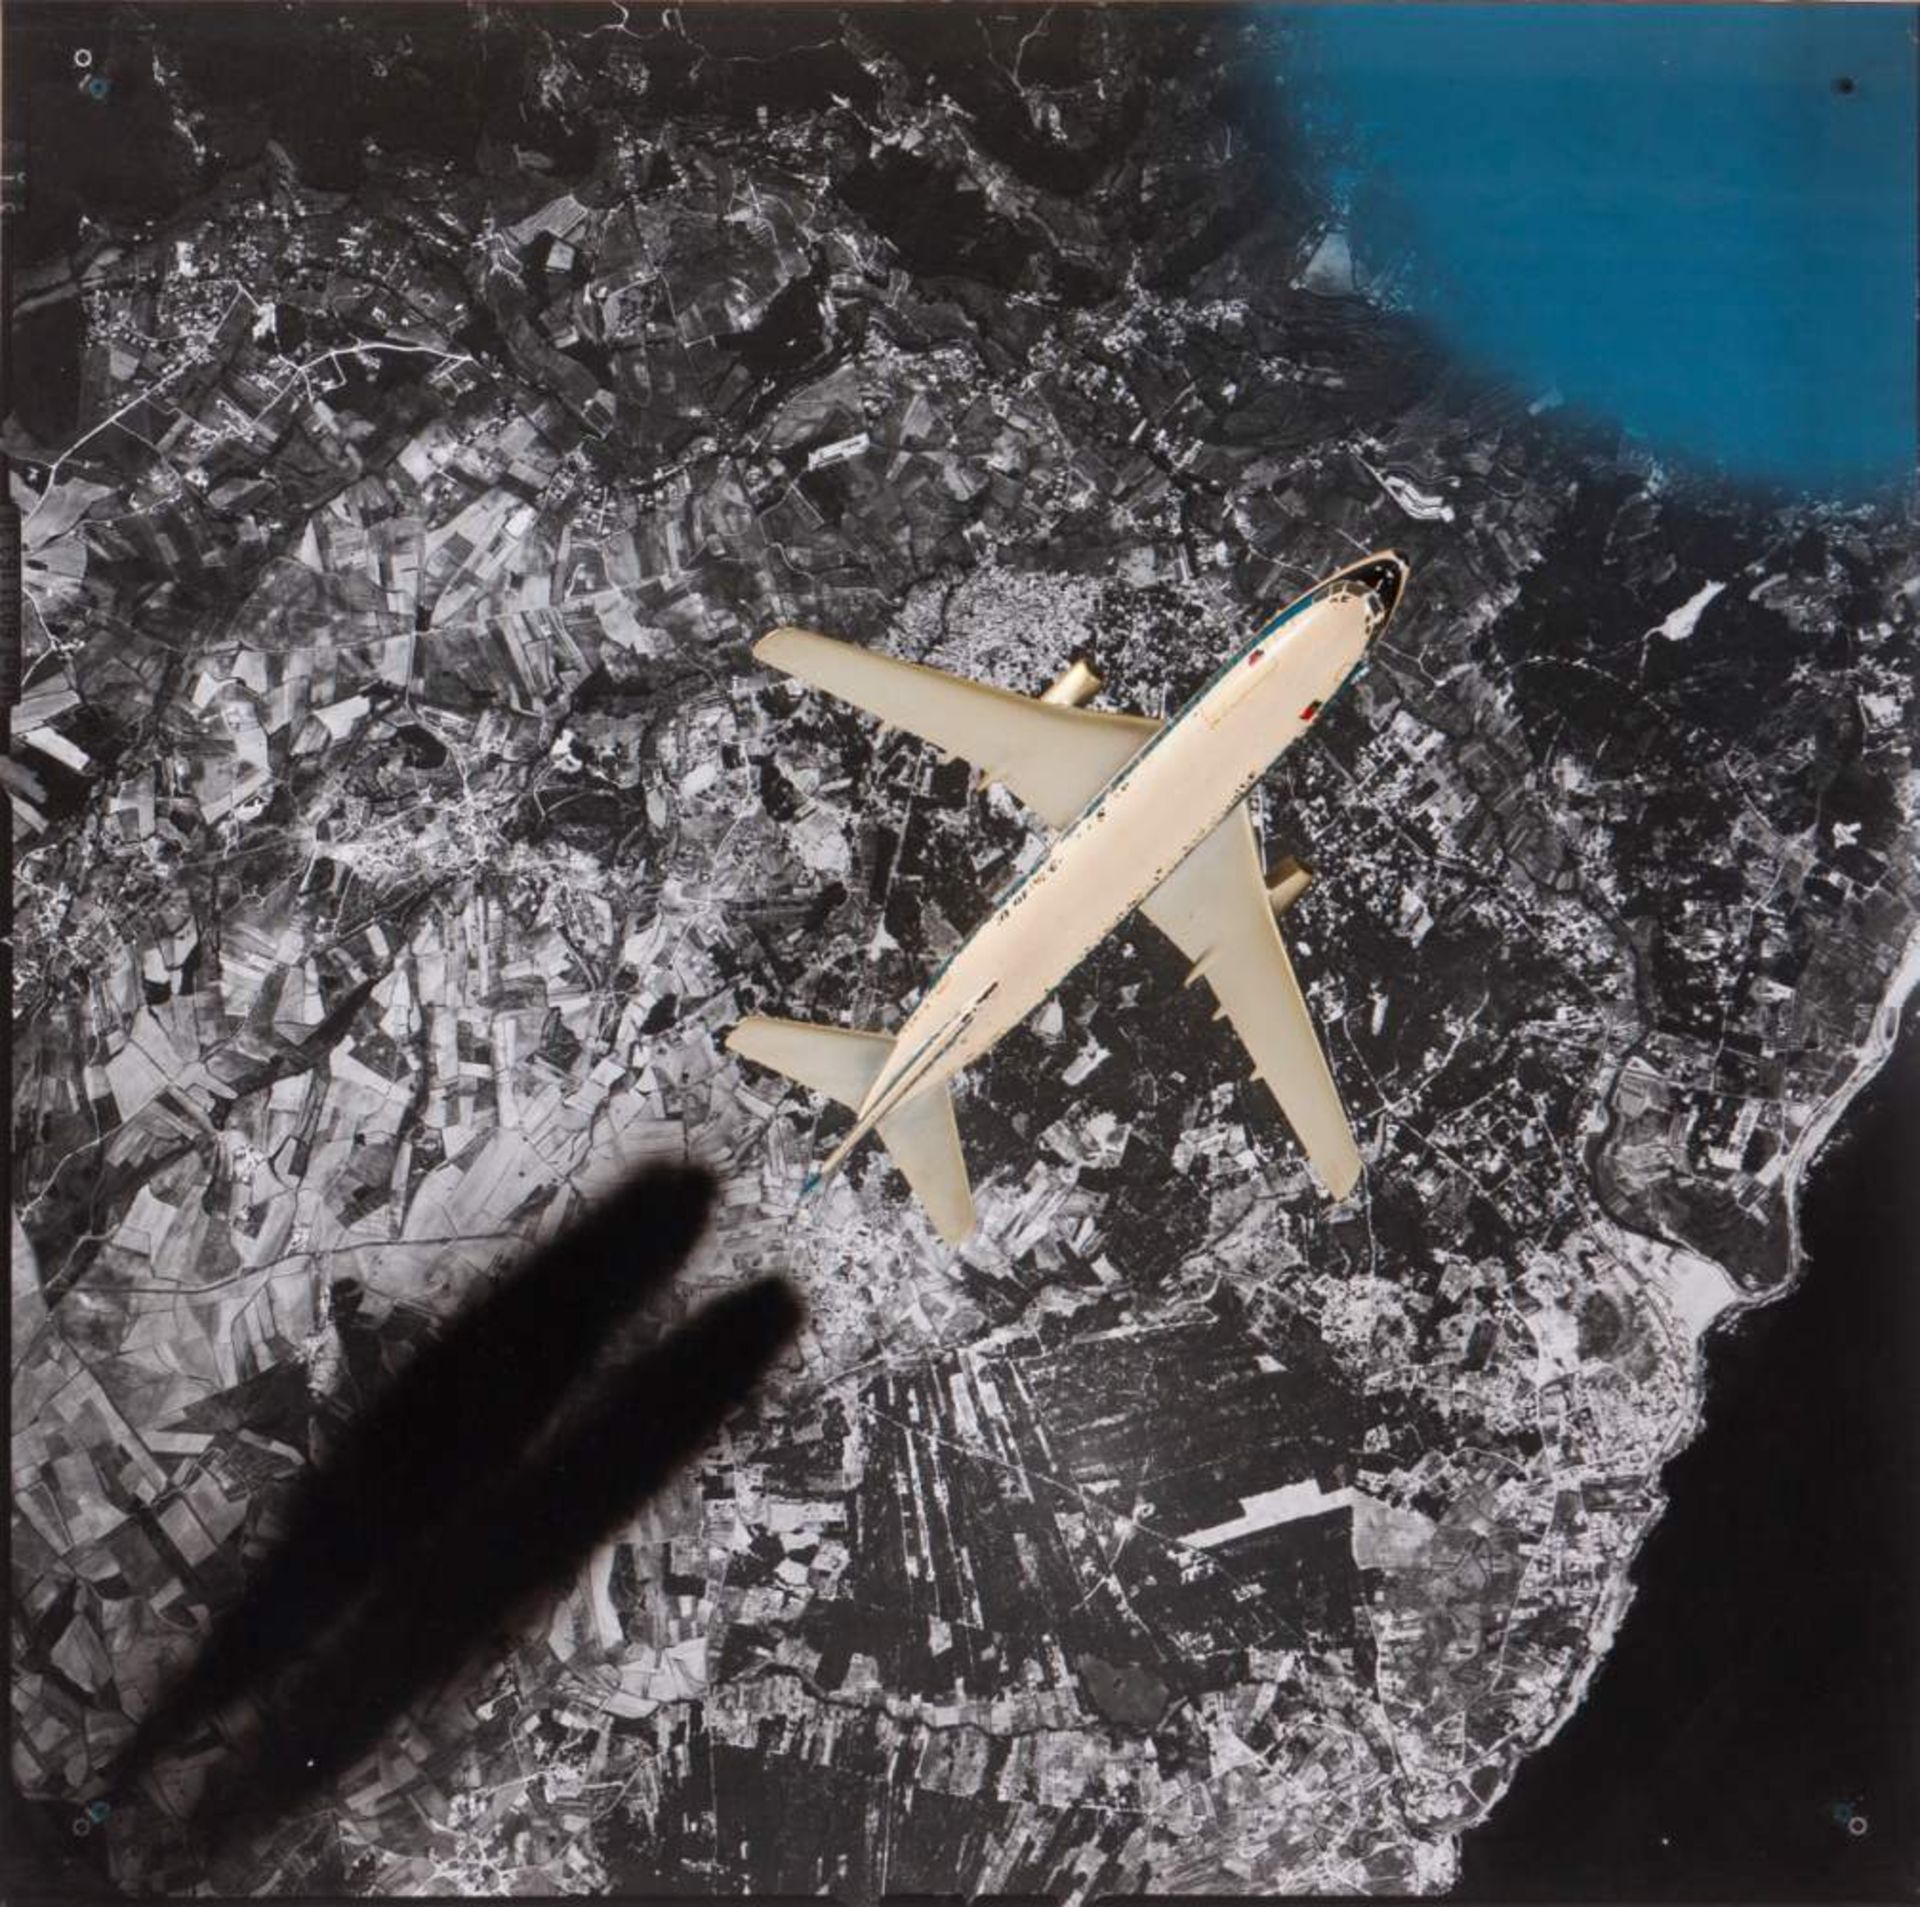 Miguel Palma (n.1964)
Untitled
Acrylic, plywood , model airplane and aerial Photograph sculpture